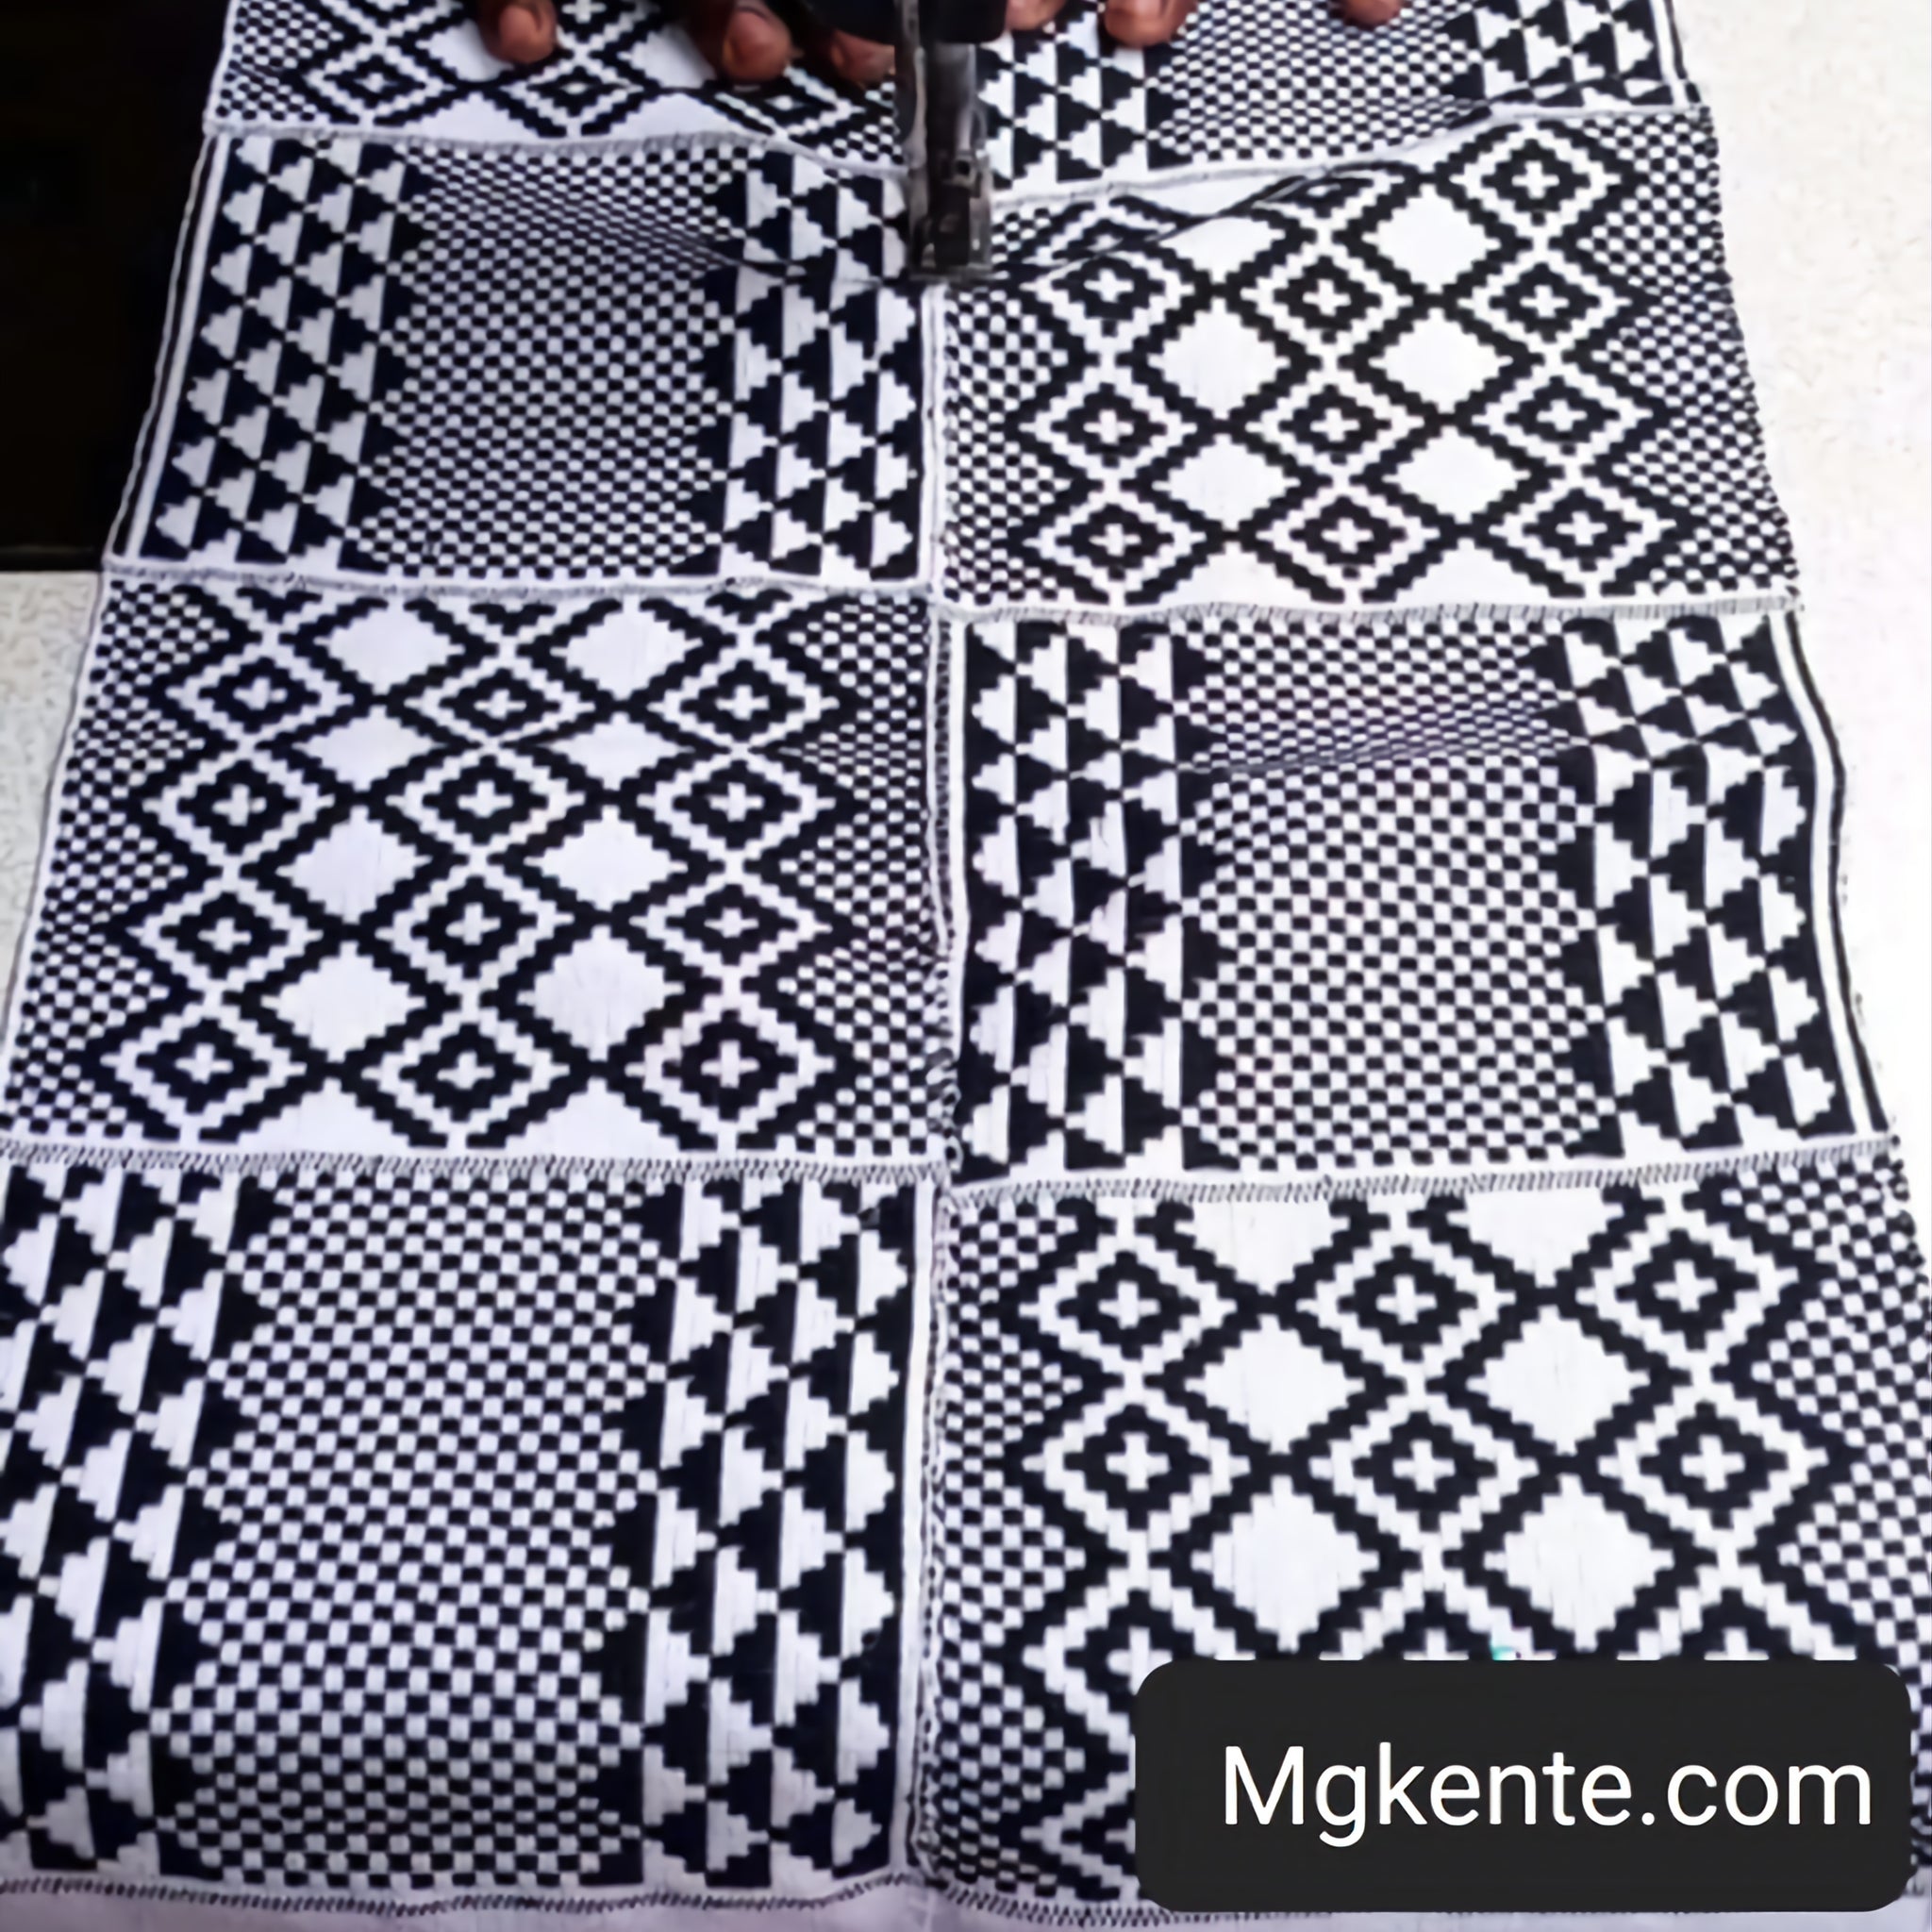 MG Authentic Hand Weaved Kente Cloth A021